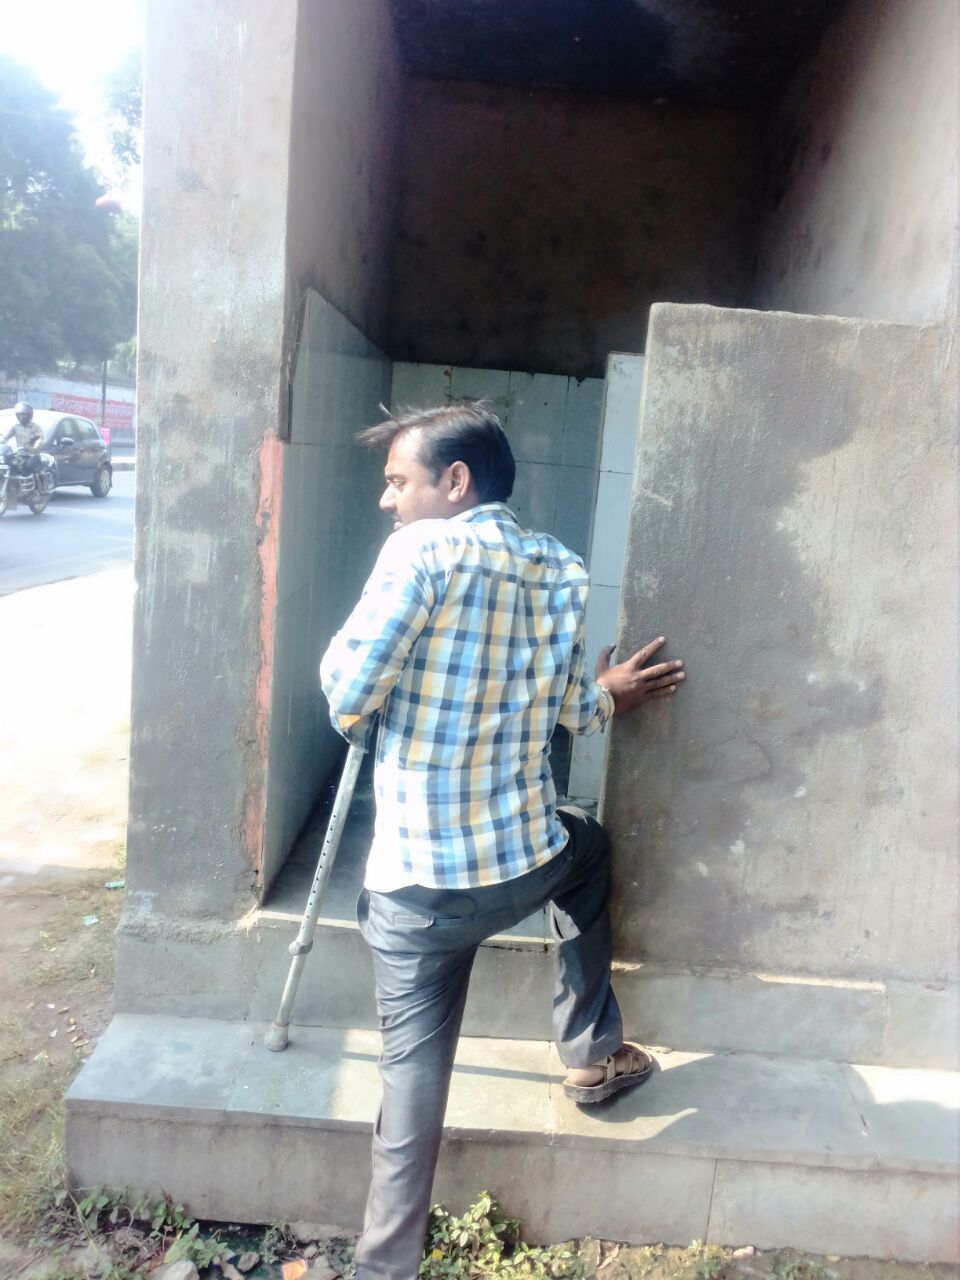 Akhilesh struggles hard to balance his crutches on tiles as well as steps in order to access a public toilet in Daliganj, an area in the heart of Lucknow, the state capital of Uttar Pradesh.